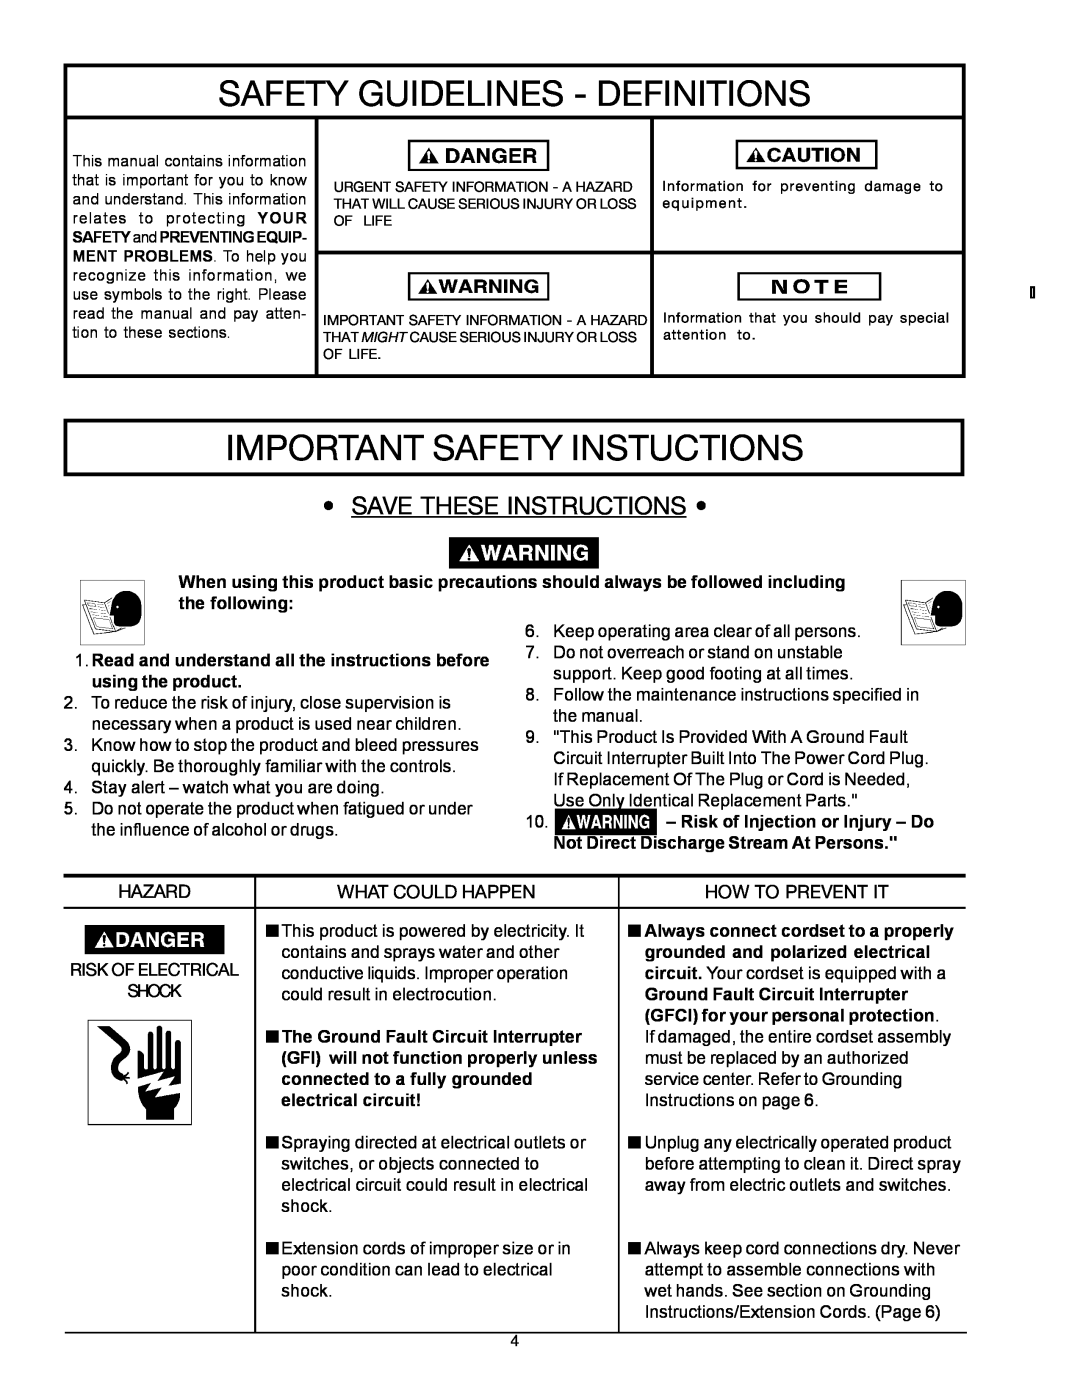 DeVillbiss Air Power Company W1218, MGP-1218 owner manual Safety Guidelines - Definitions, Important Safety Instuctions 